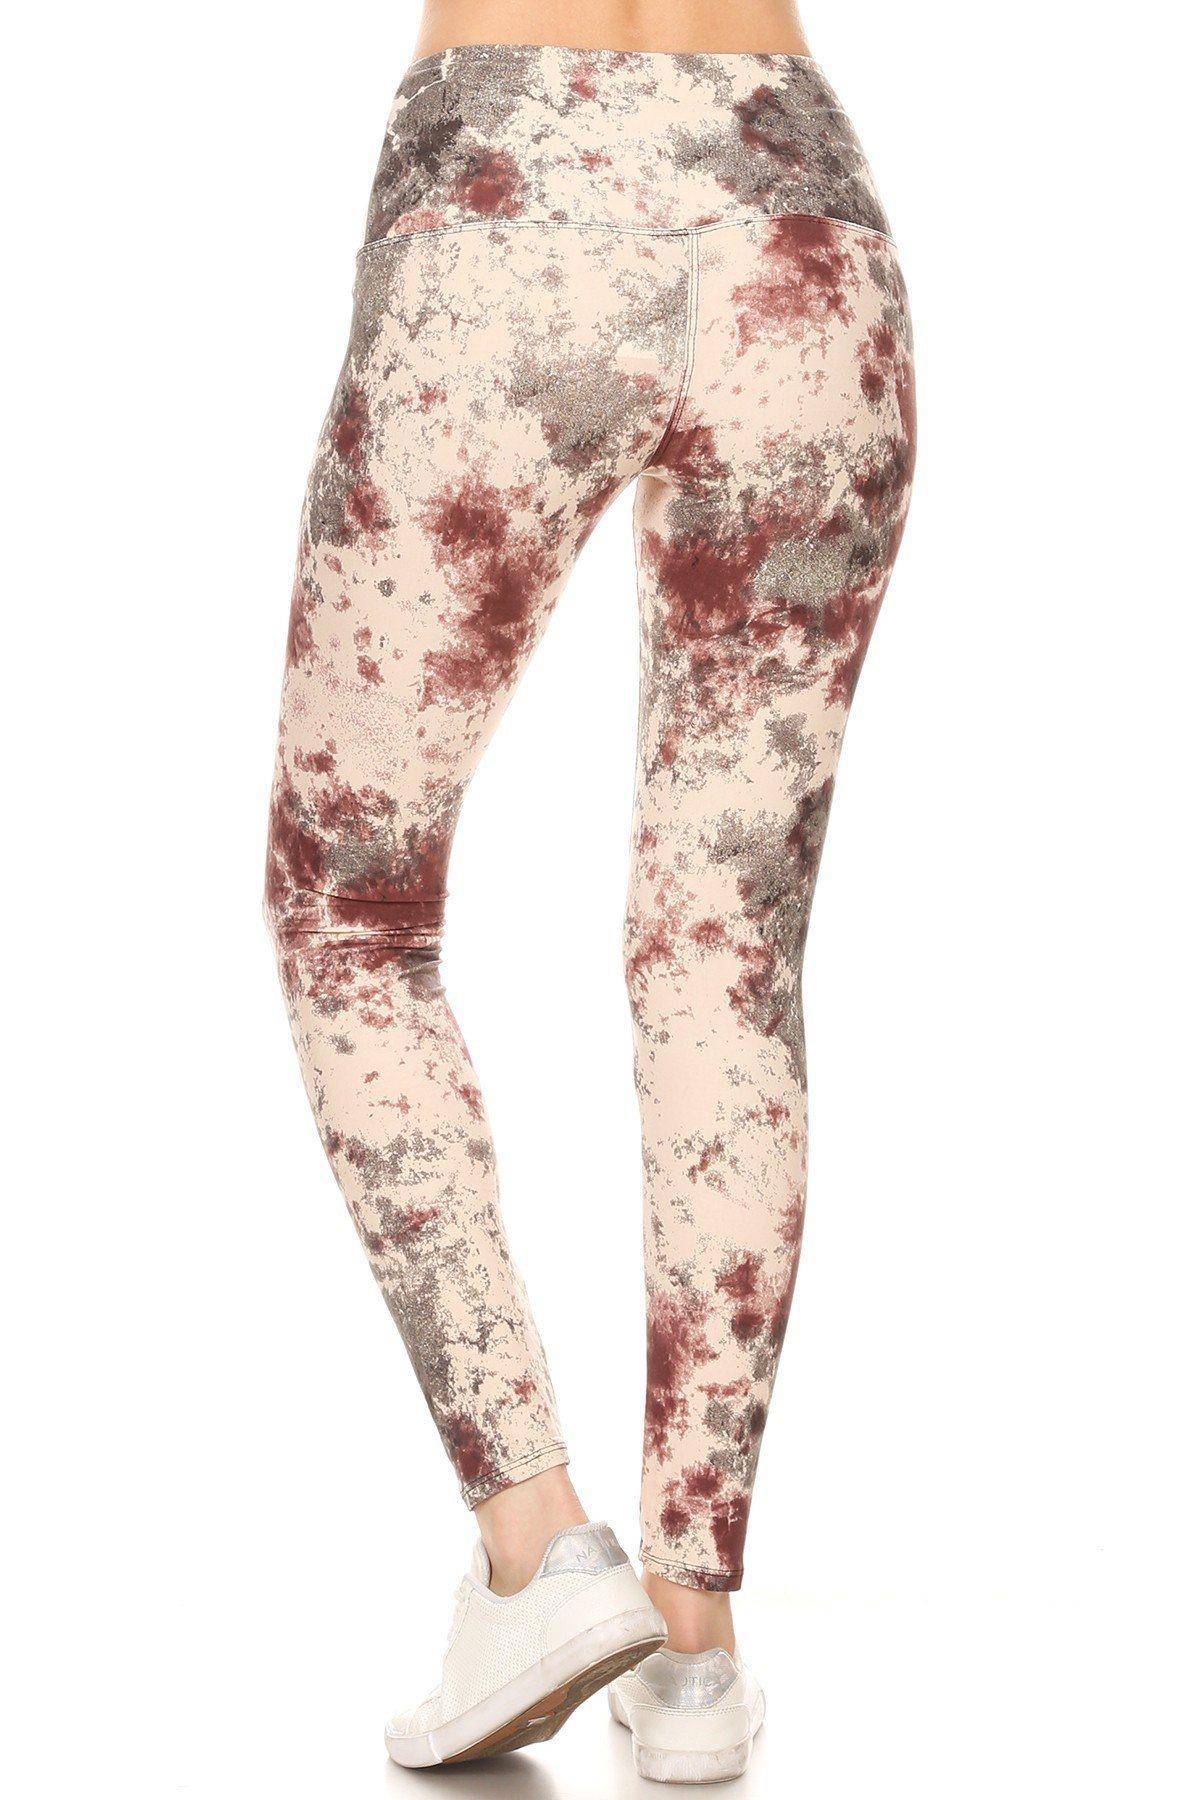 5-inch Long Yoga Style Banded Lined Tie Dye Printed Knit Legging With High Waist - Pearlara